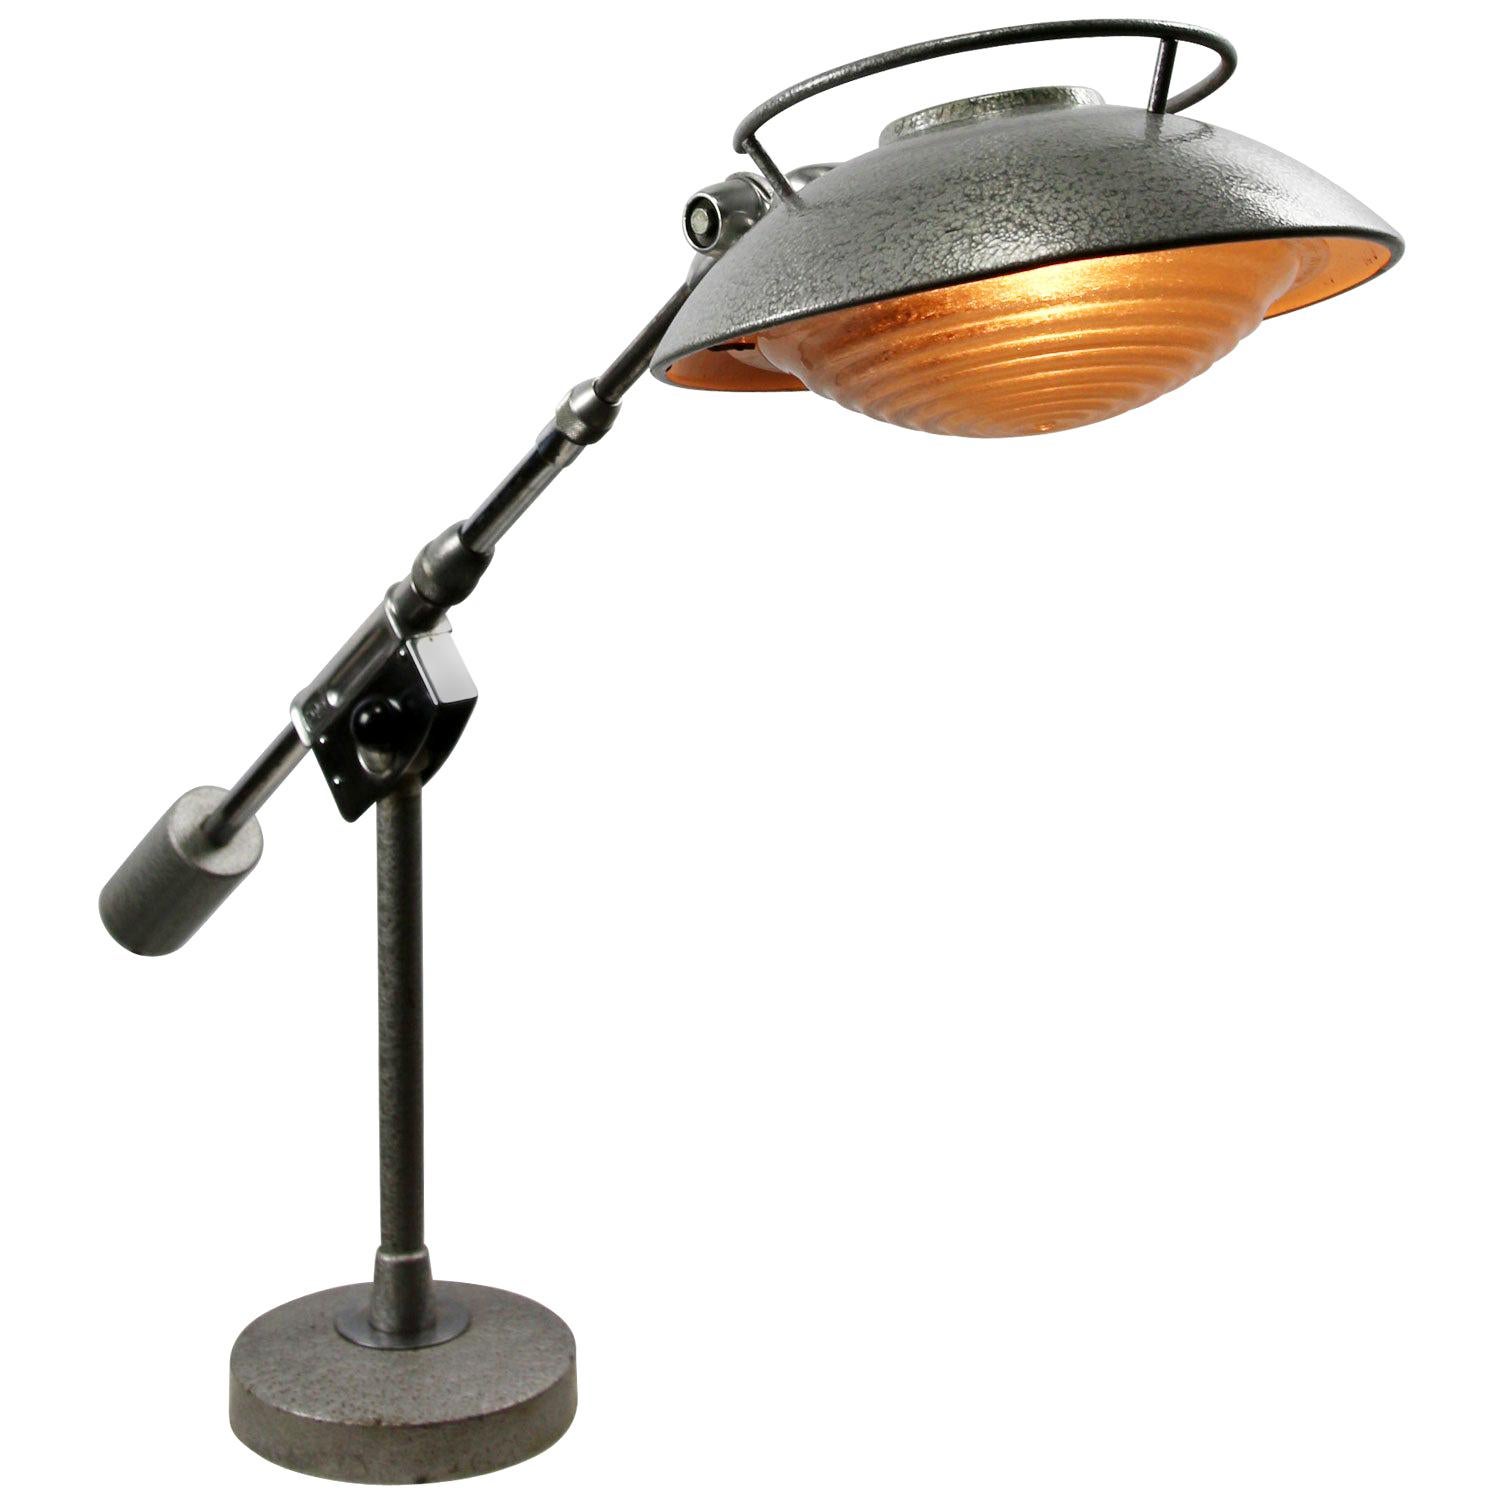 Architect table desk light by Ferdinand Solère for SOLR no. 202